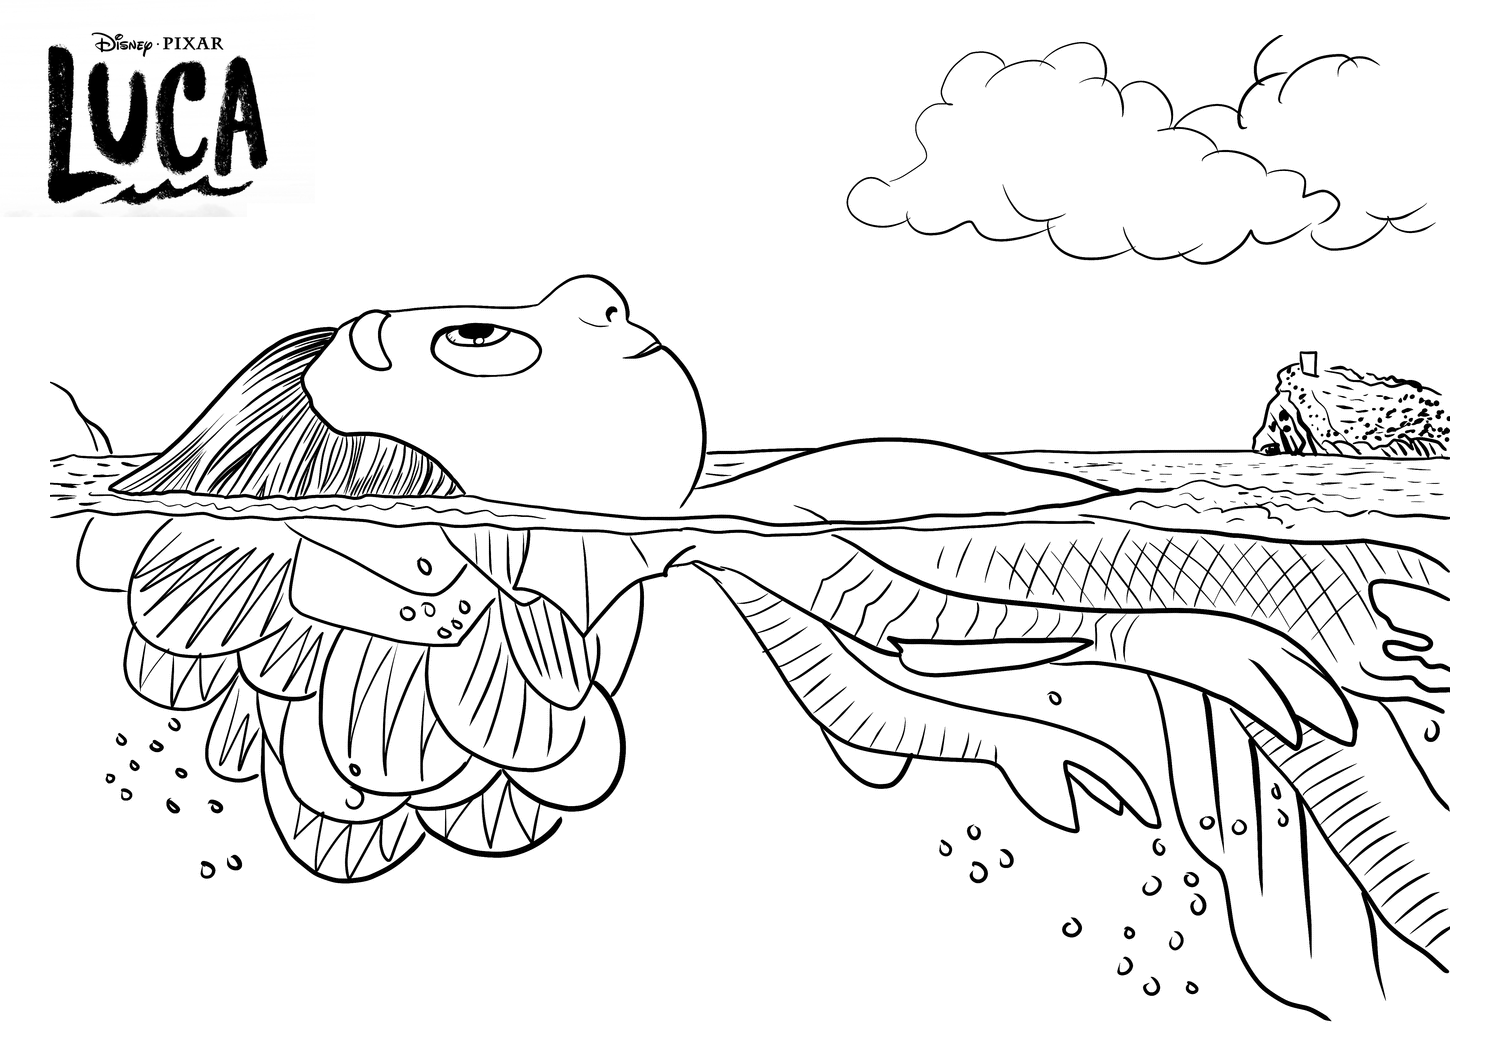 Sea monster luca coloring page monster coloring pages disney coloring pages coloring pages